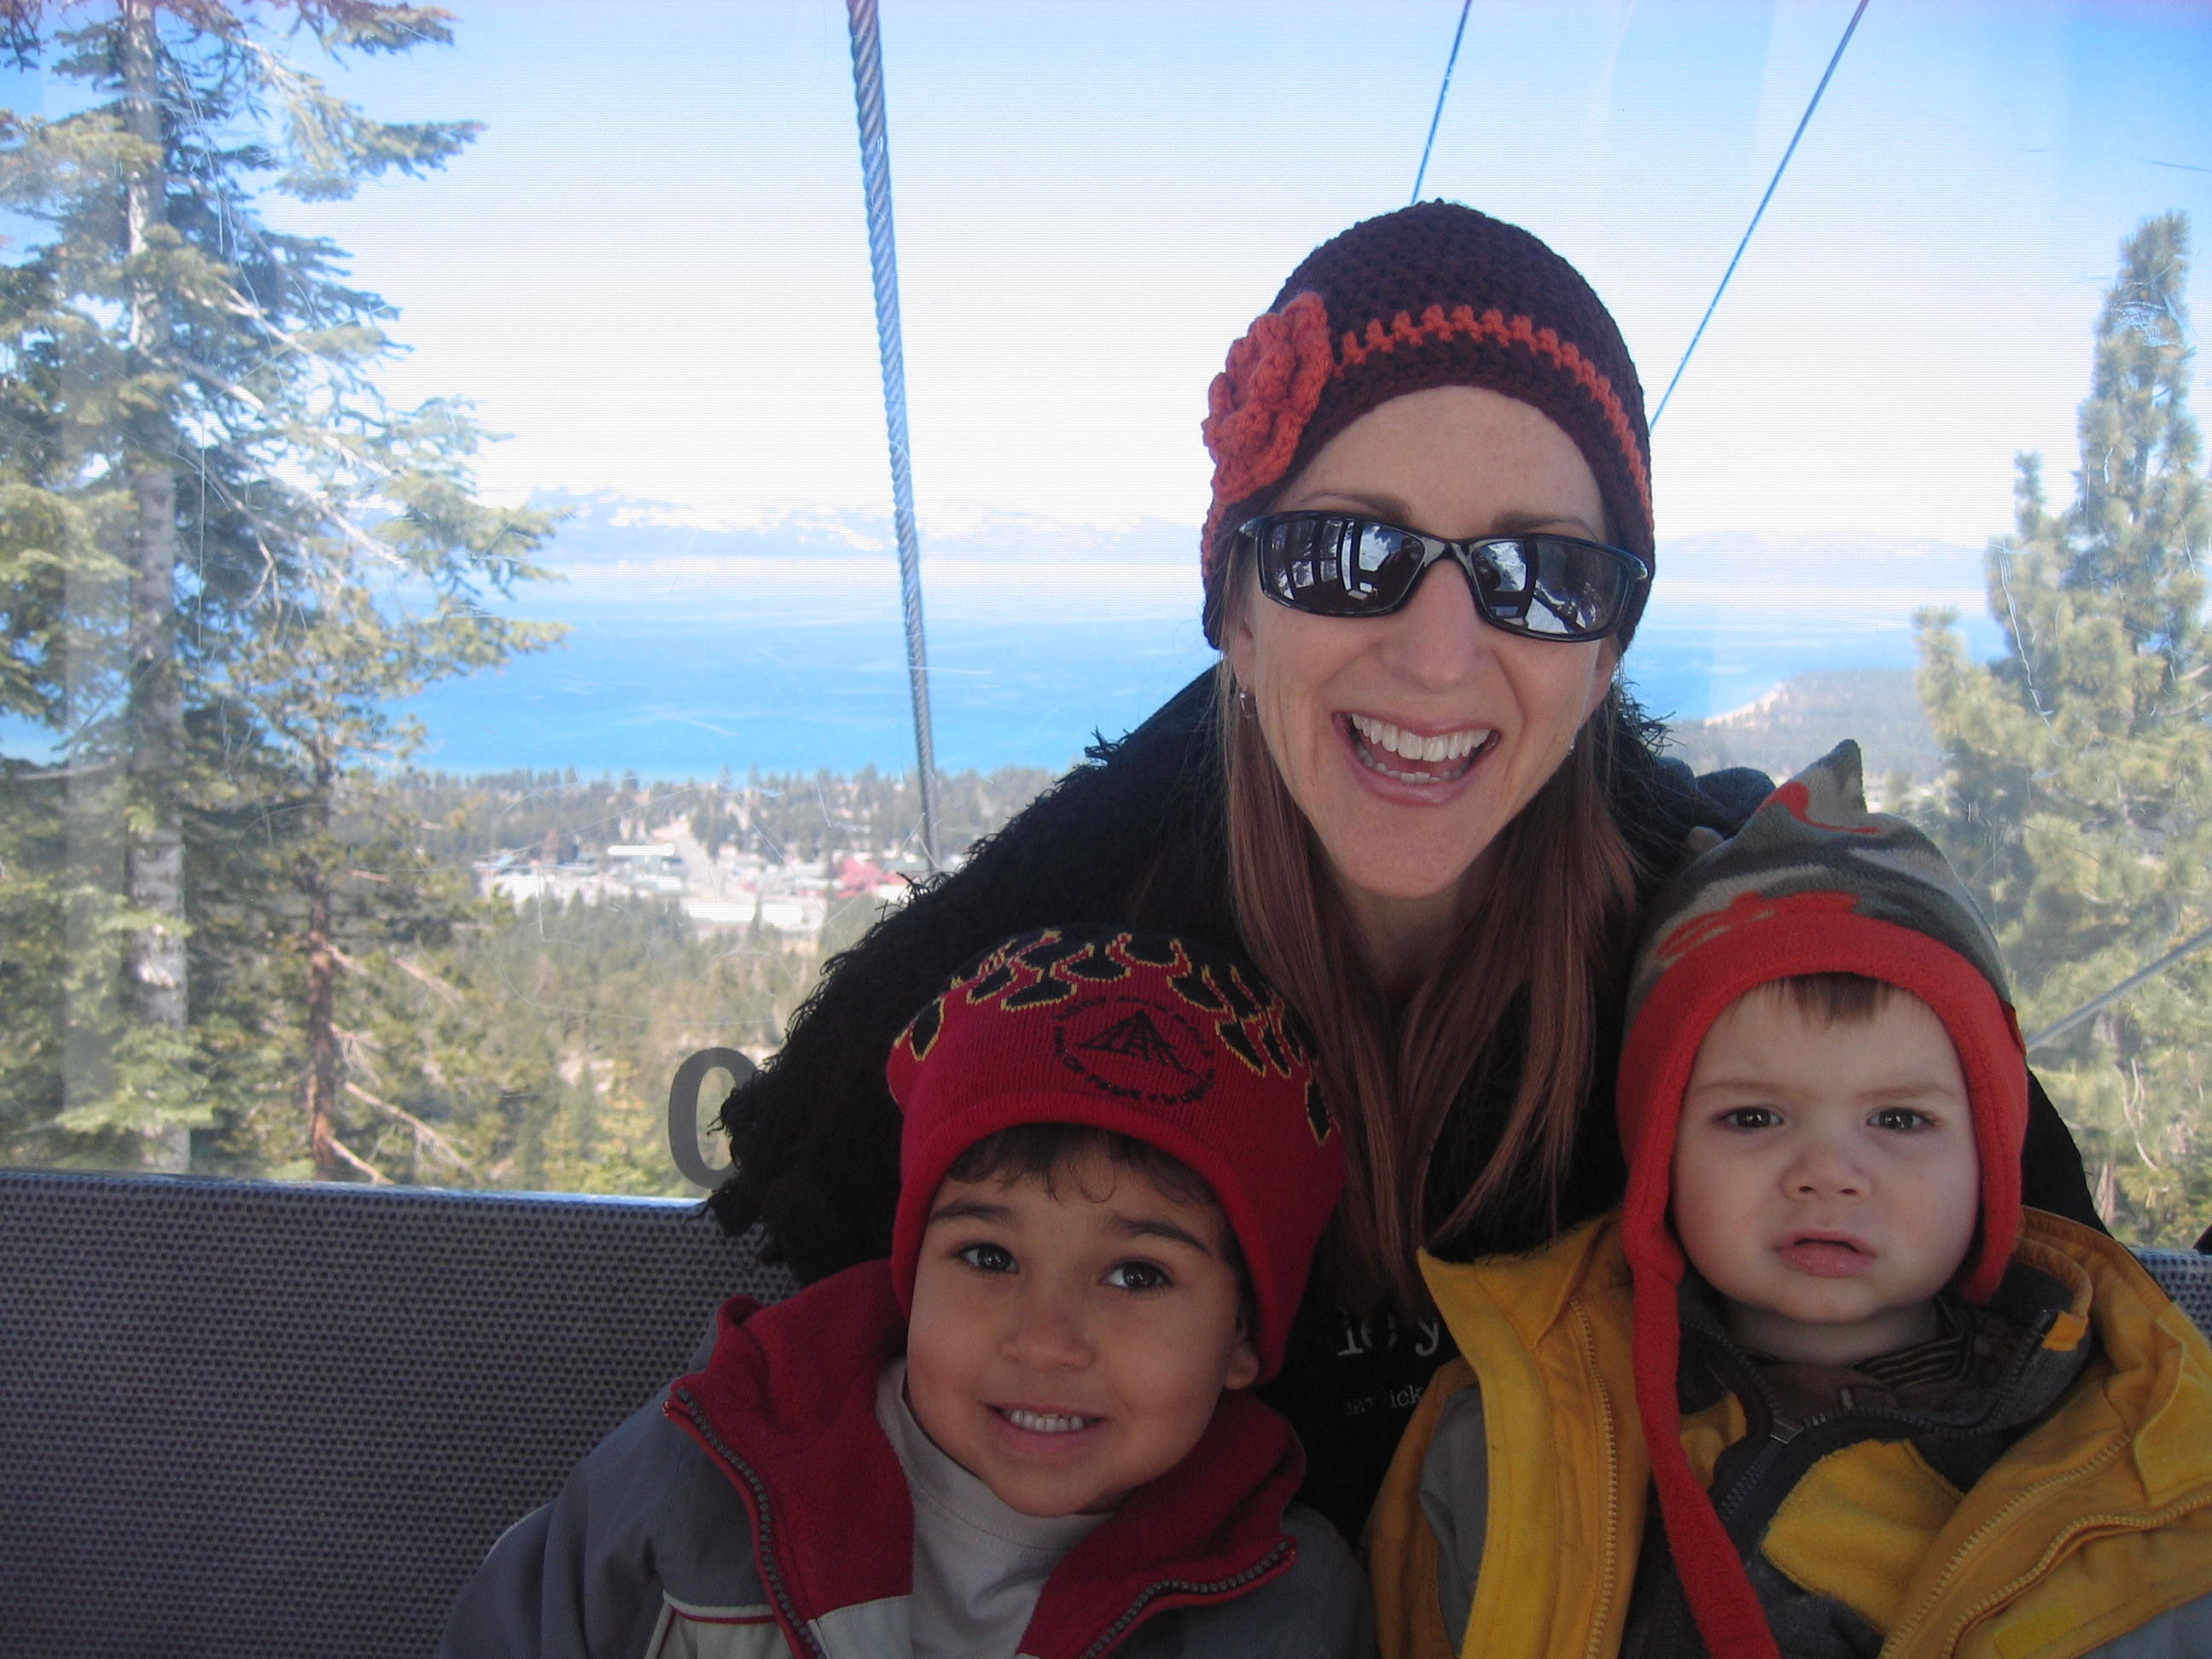 Riding the gondola up the mountain, Lake Tahoe behind us...OK, so the view was worth at least 10 bucks. We still have to justify 20 more dollars each.